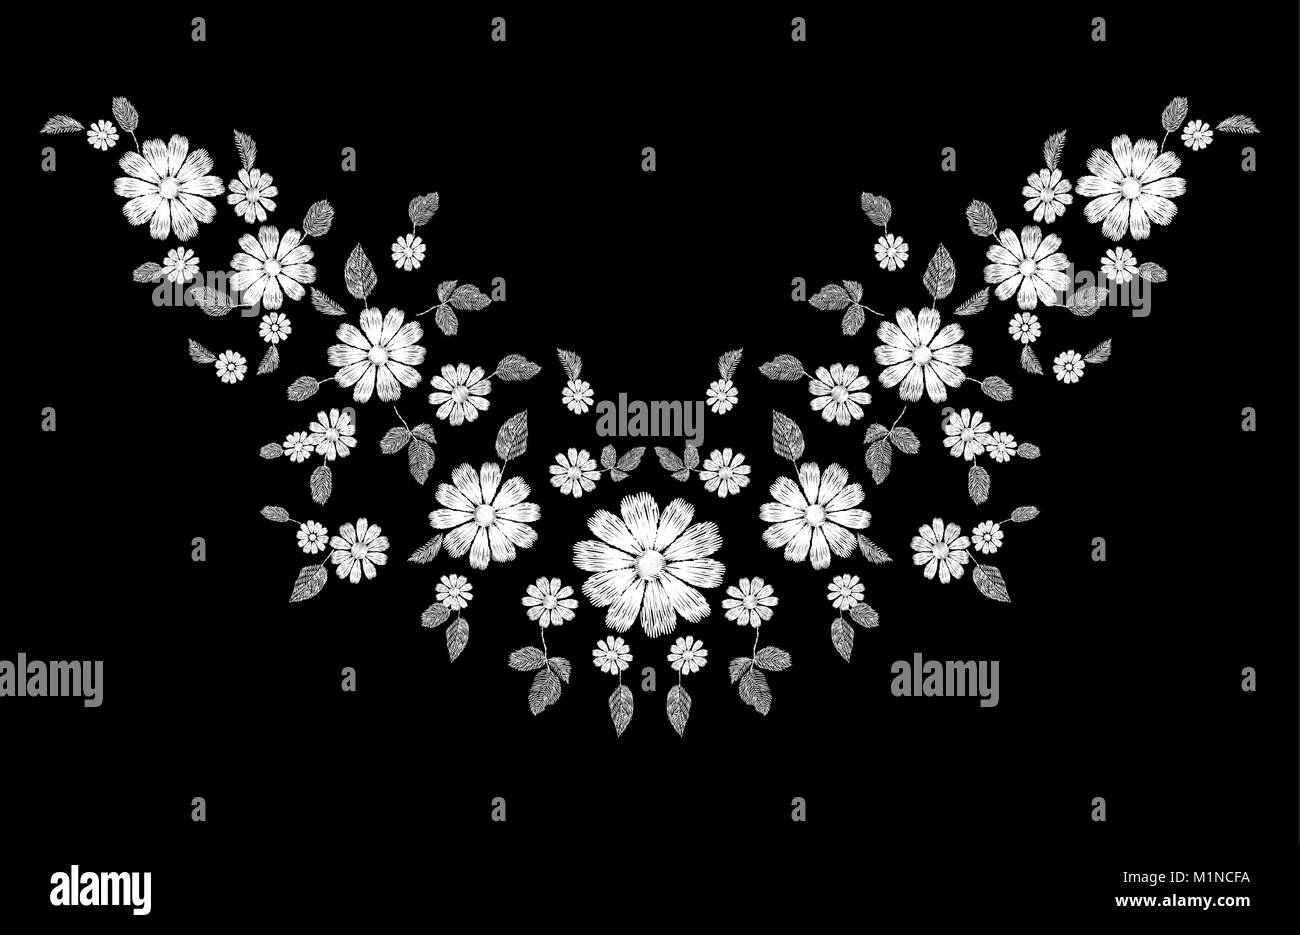 White lace flower embroidery neckline ornament. Fashion decoration stitched texture template. Ethnic traditional daisy field plant leaves textile print design vector illustration Stock Vector